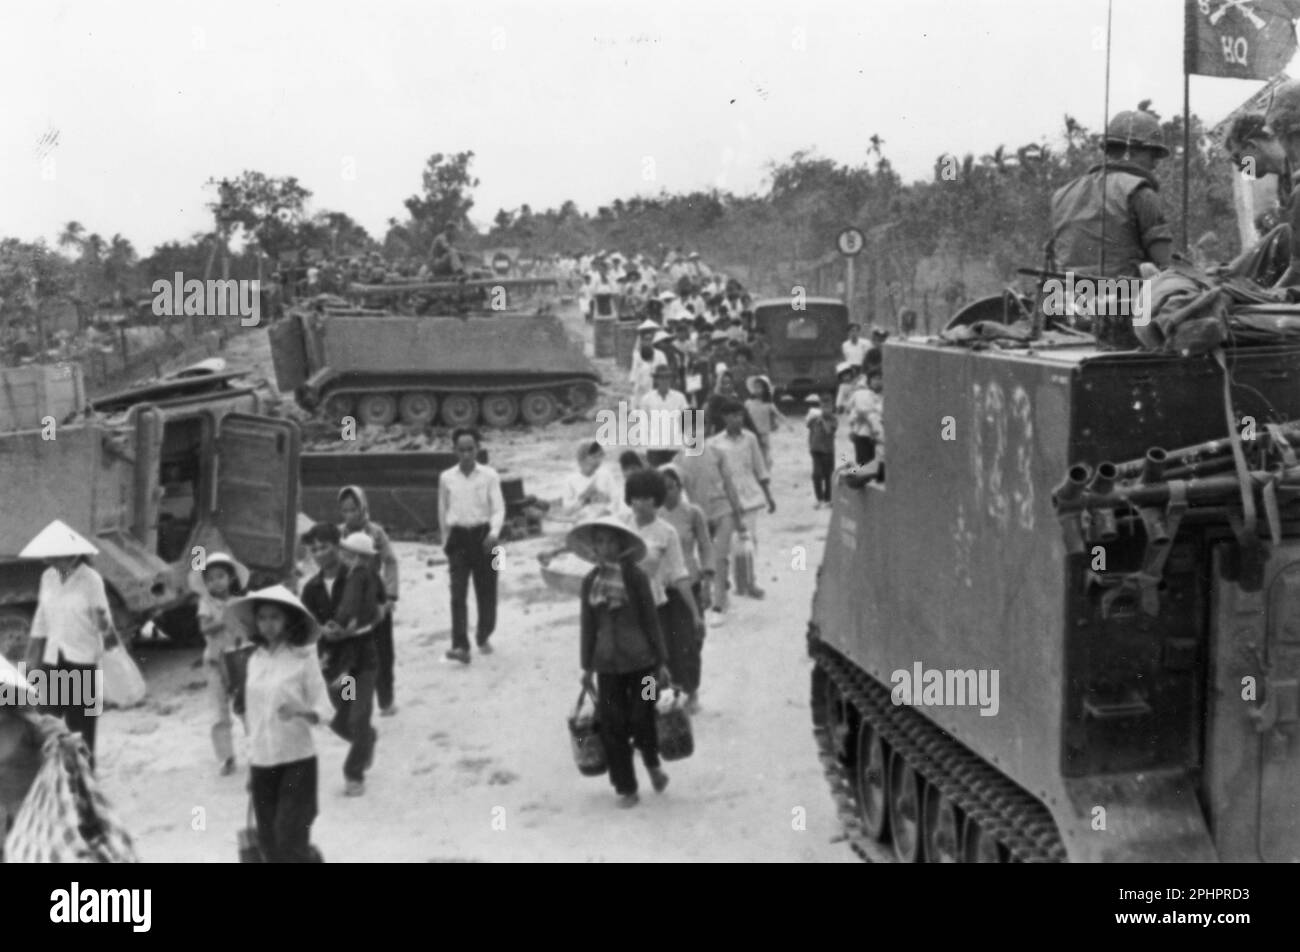 M-113 armored personnel carriers stand by as Vietnamese refugees evacuate the village of My Tho, during the Tet Offensive. South Vietnam, 1968. Photo by US Signal Corps) Stock Photo